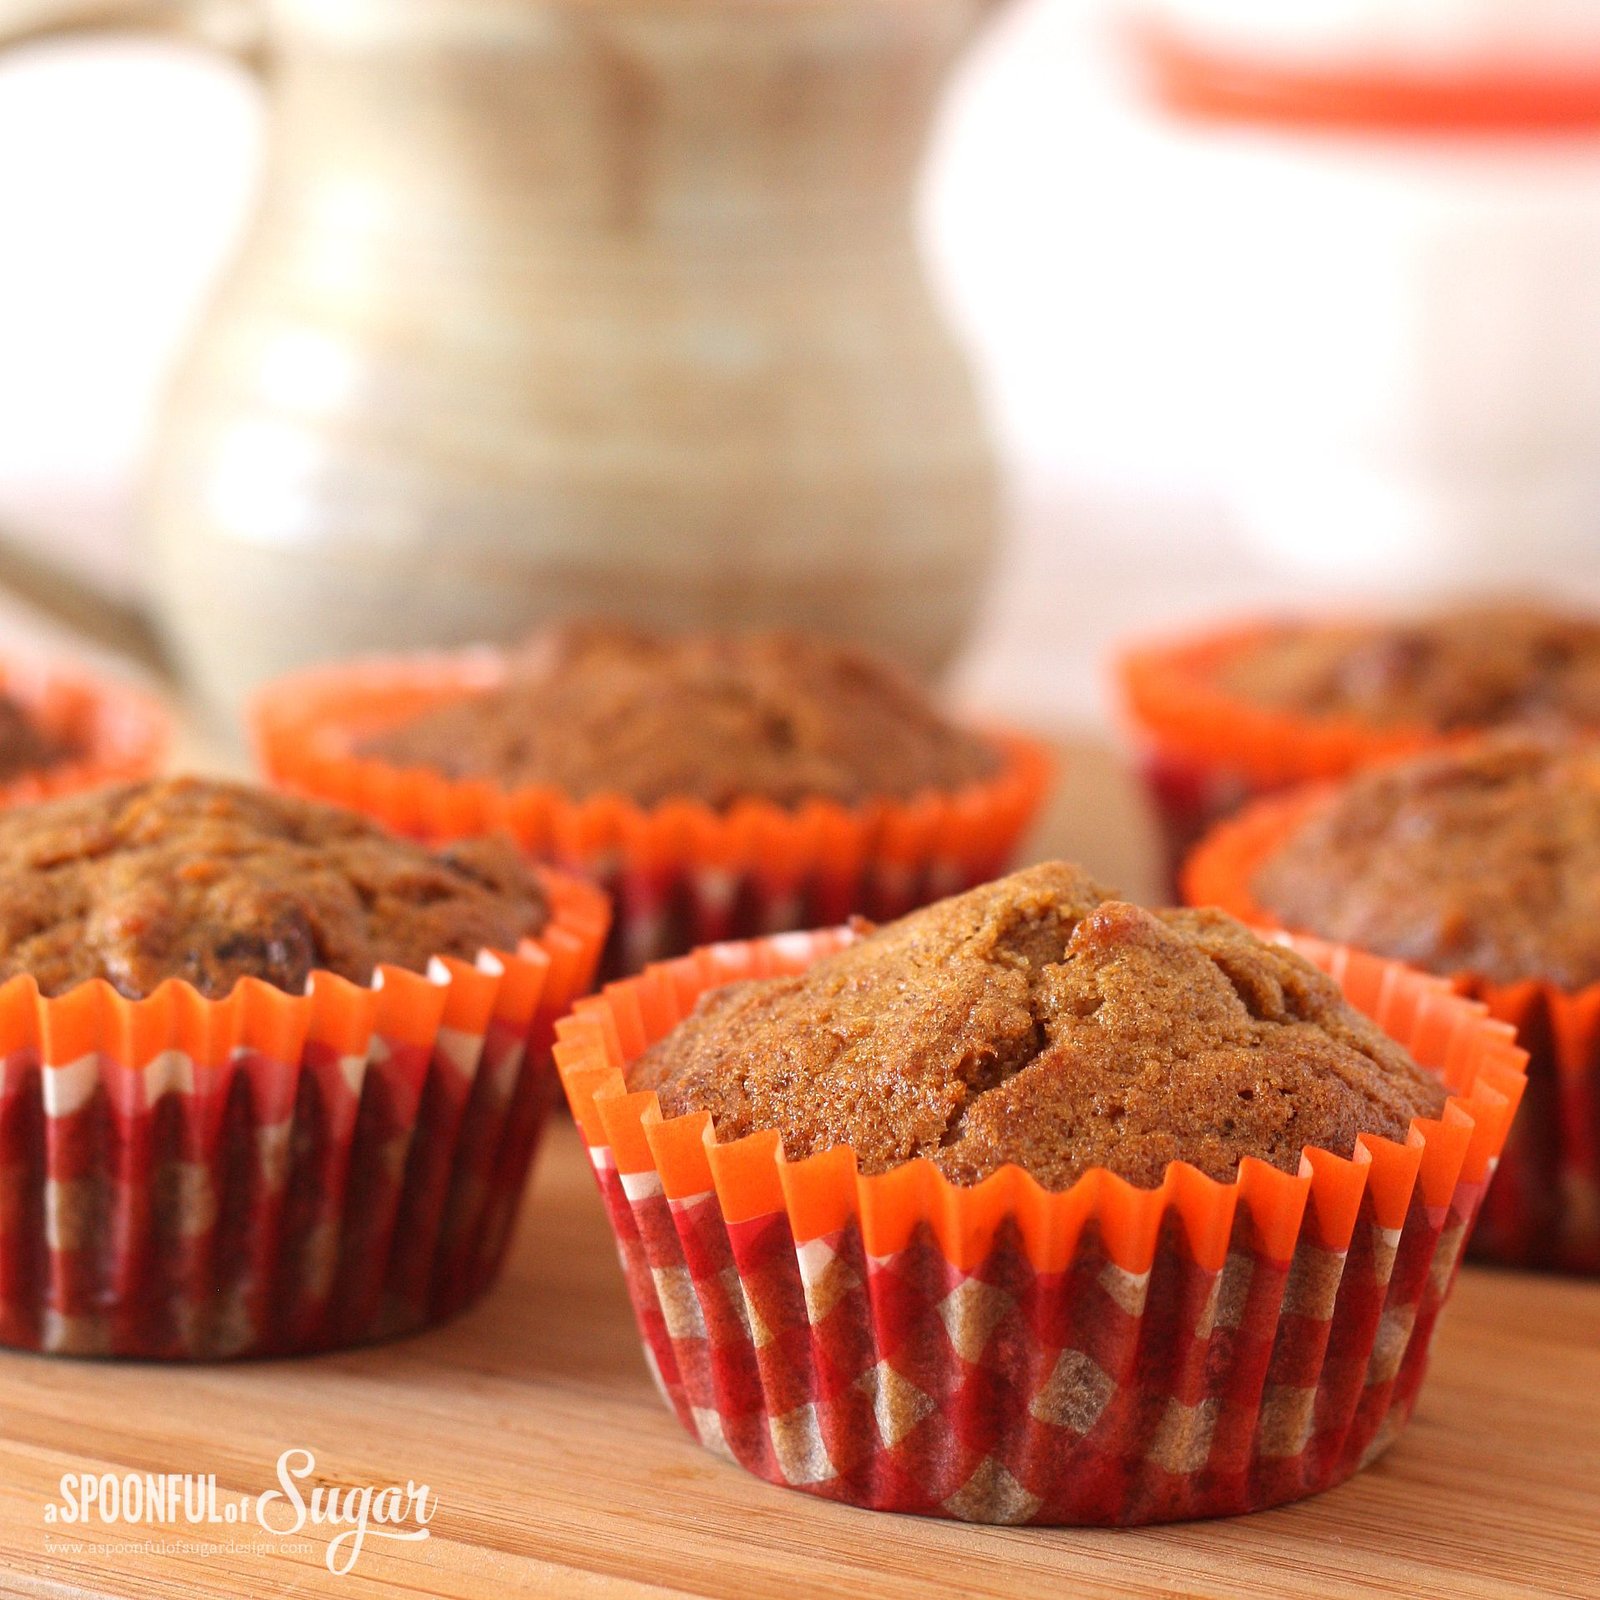 Carrot muffin recipe from A Spoonful of Sugar